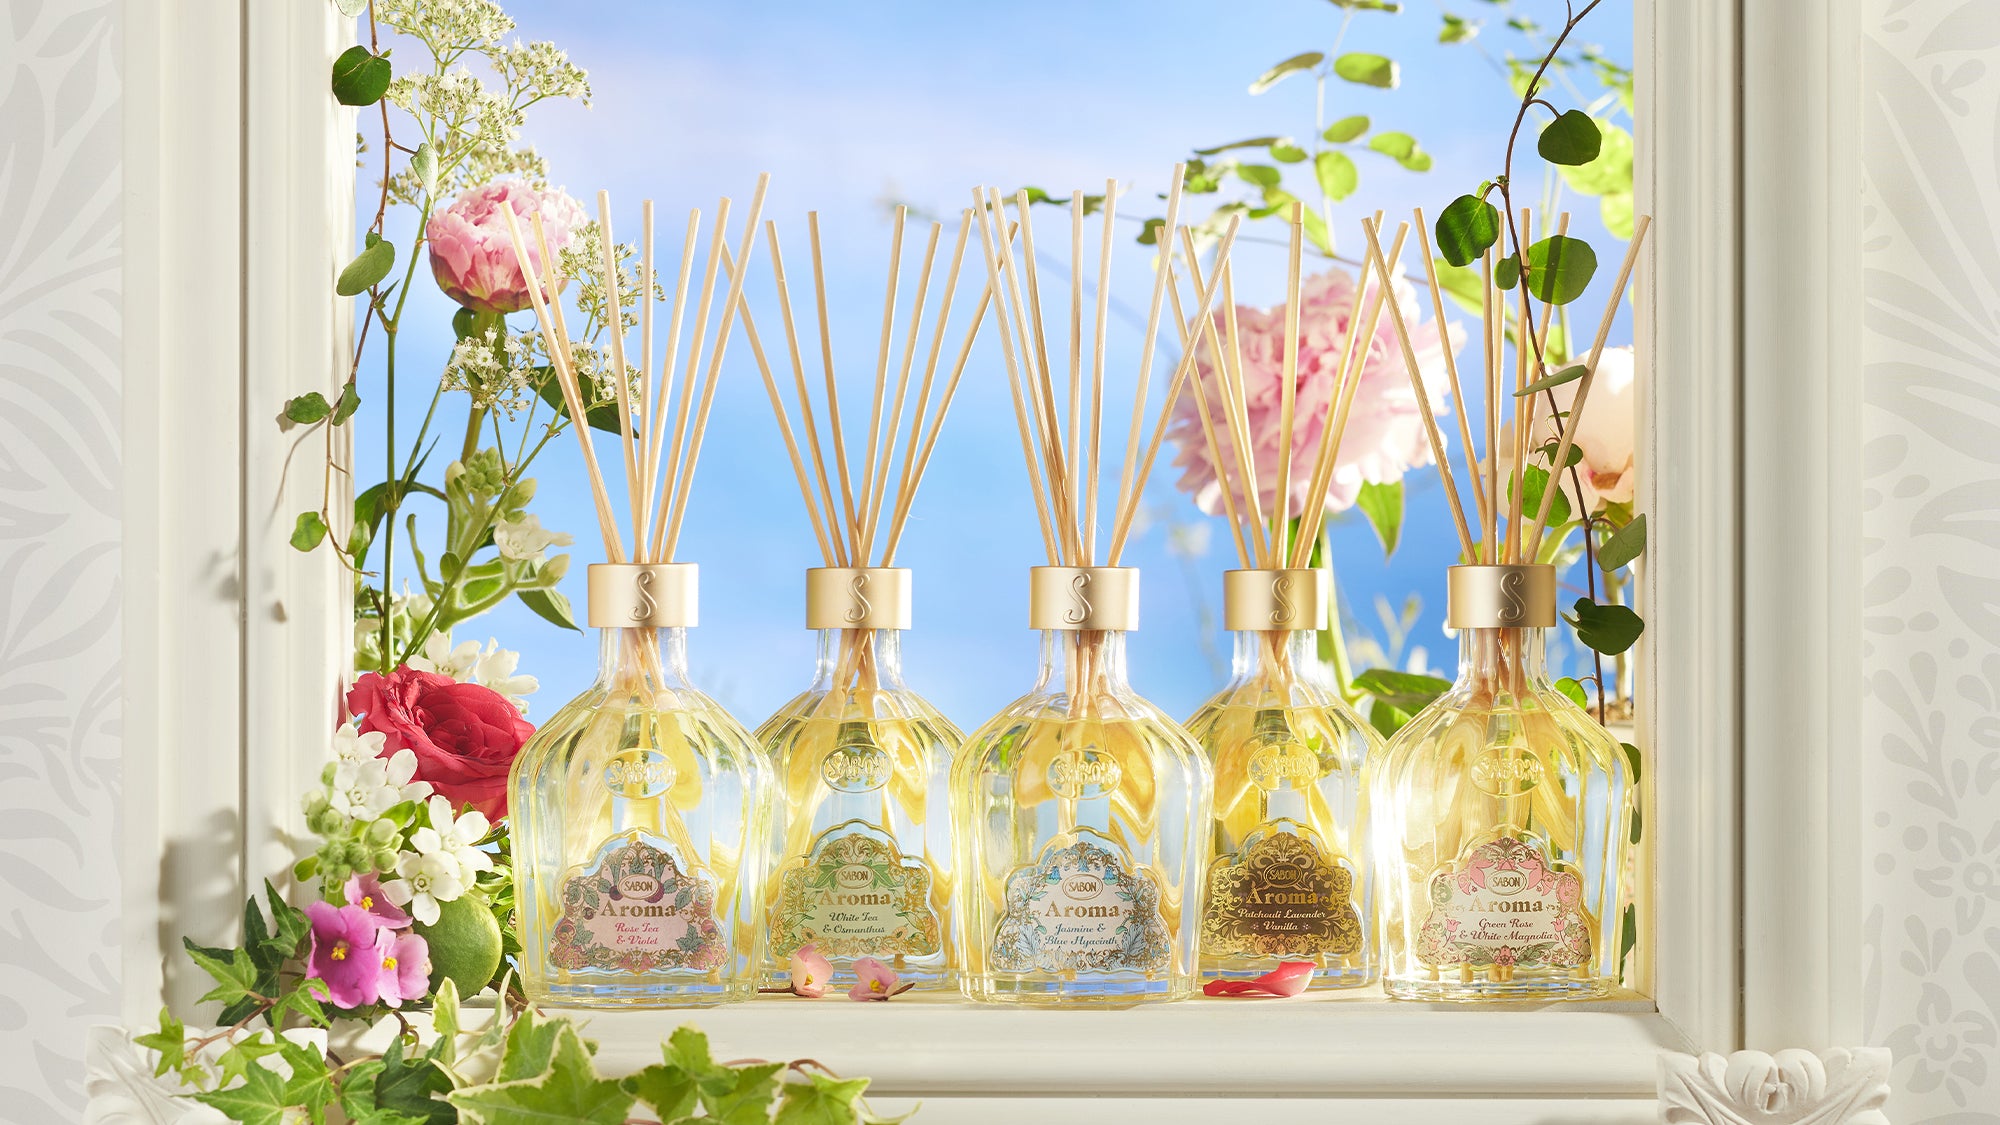 Home Scents | Home Scent Diffusers & Room Fragrances - SABON – Page 2